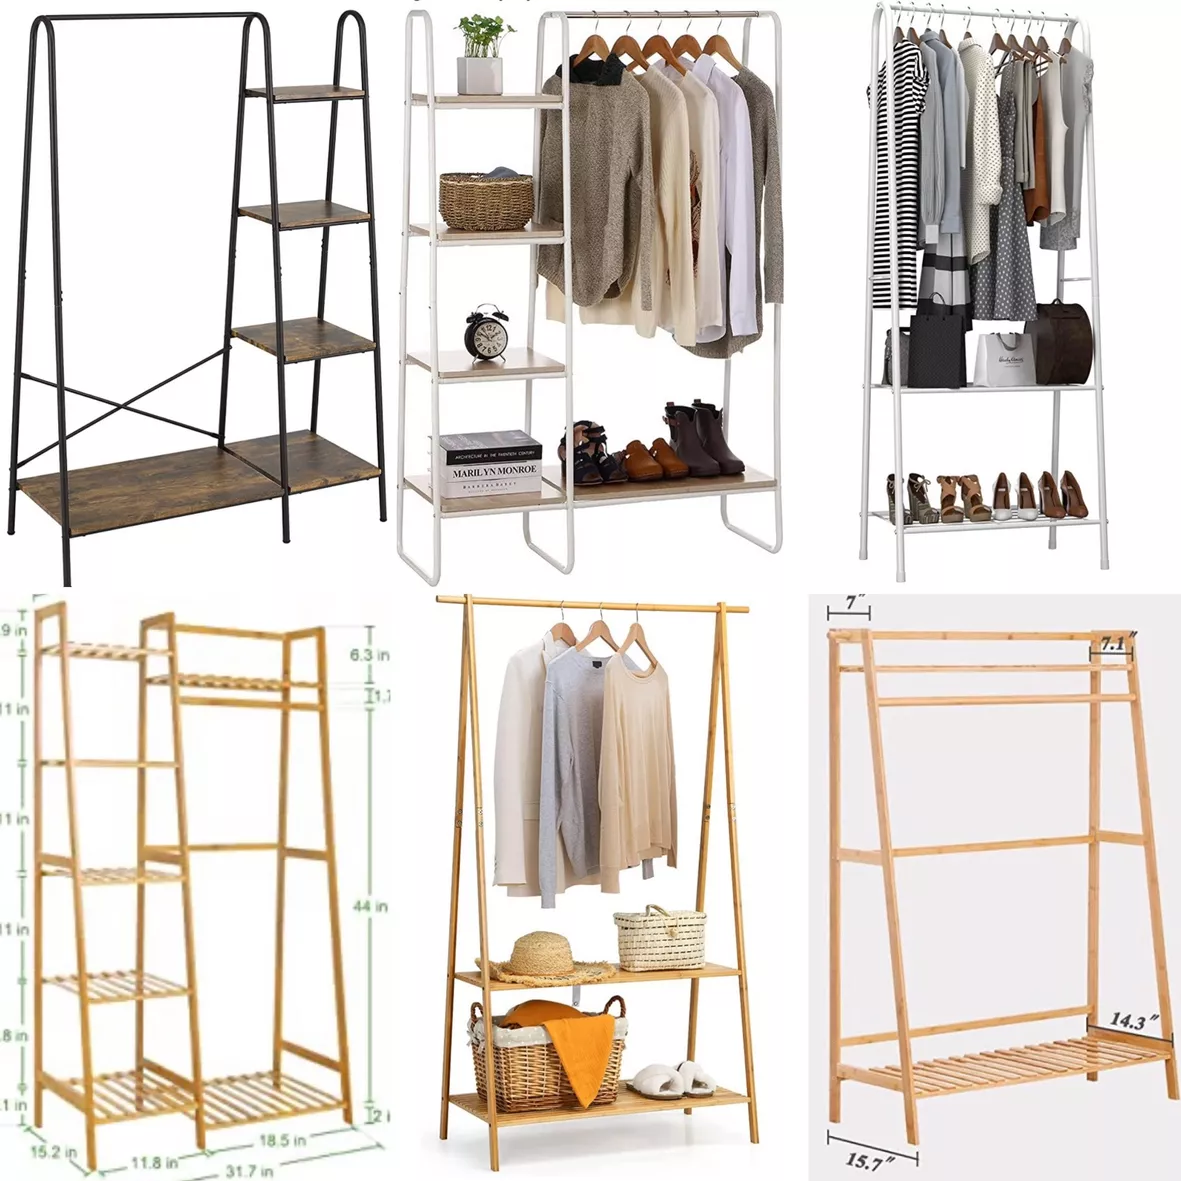 COOGOU Bamboo Wood Clothing Garment Rack with Shelves Clothes